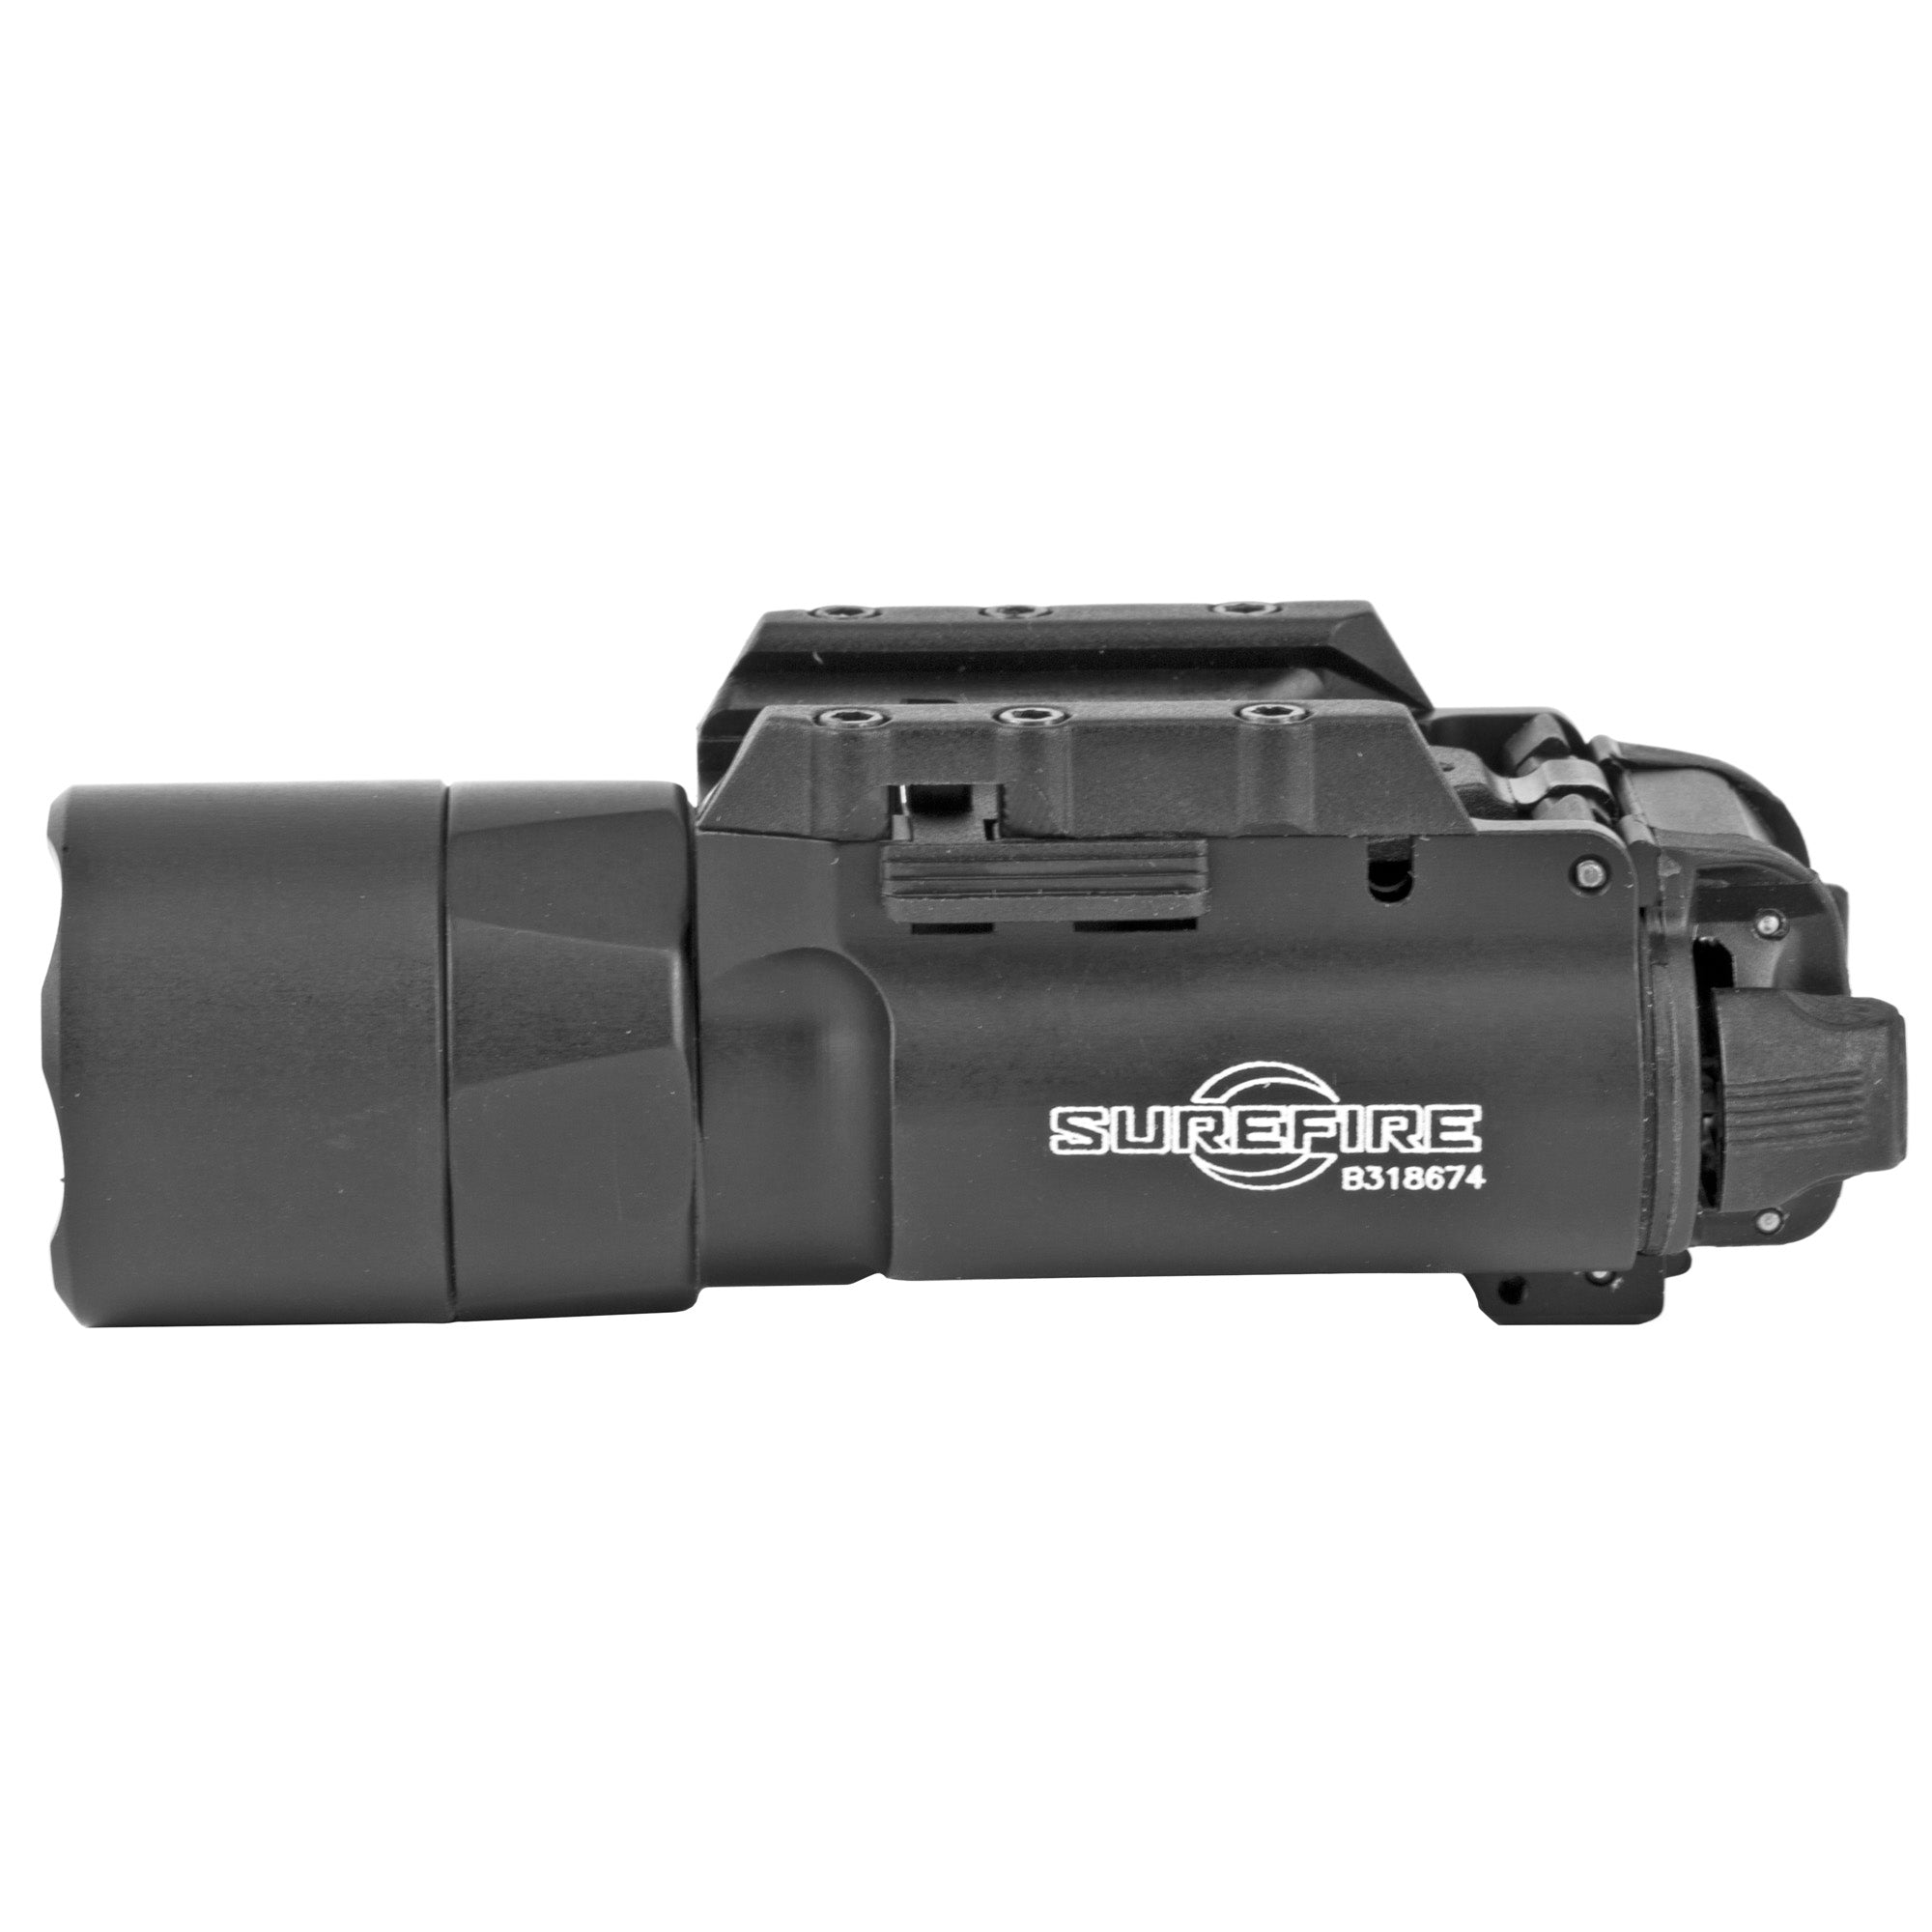 Surefire, X300 Ultra, White LED, 1000 Lumens, Fits Picatinny and Universal